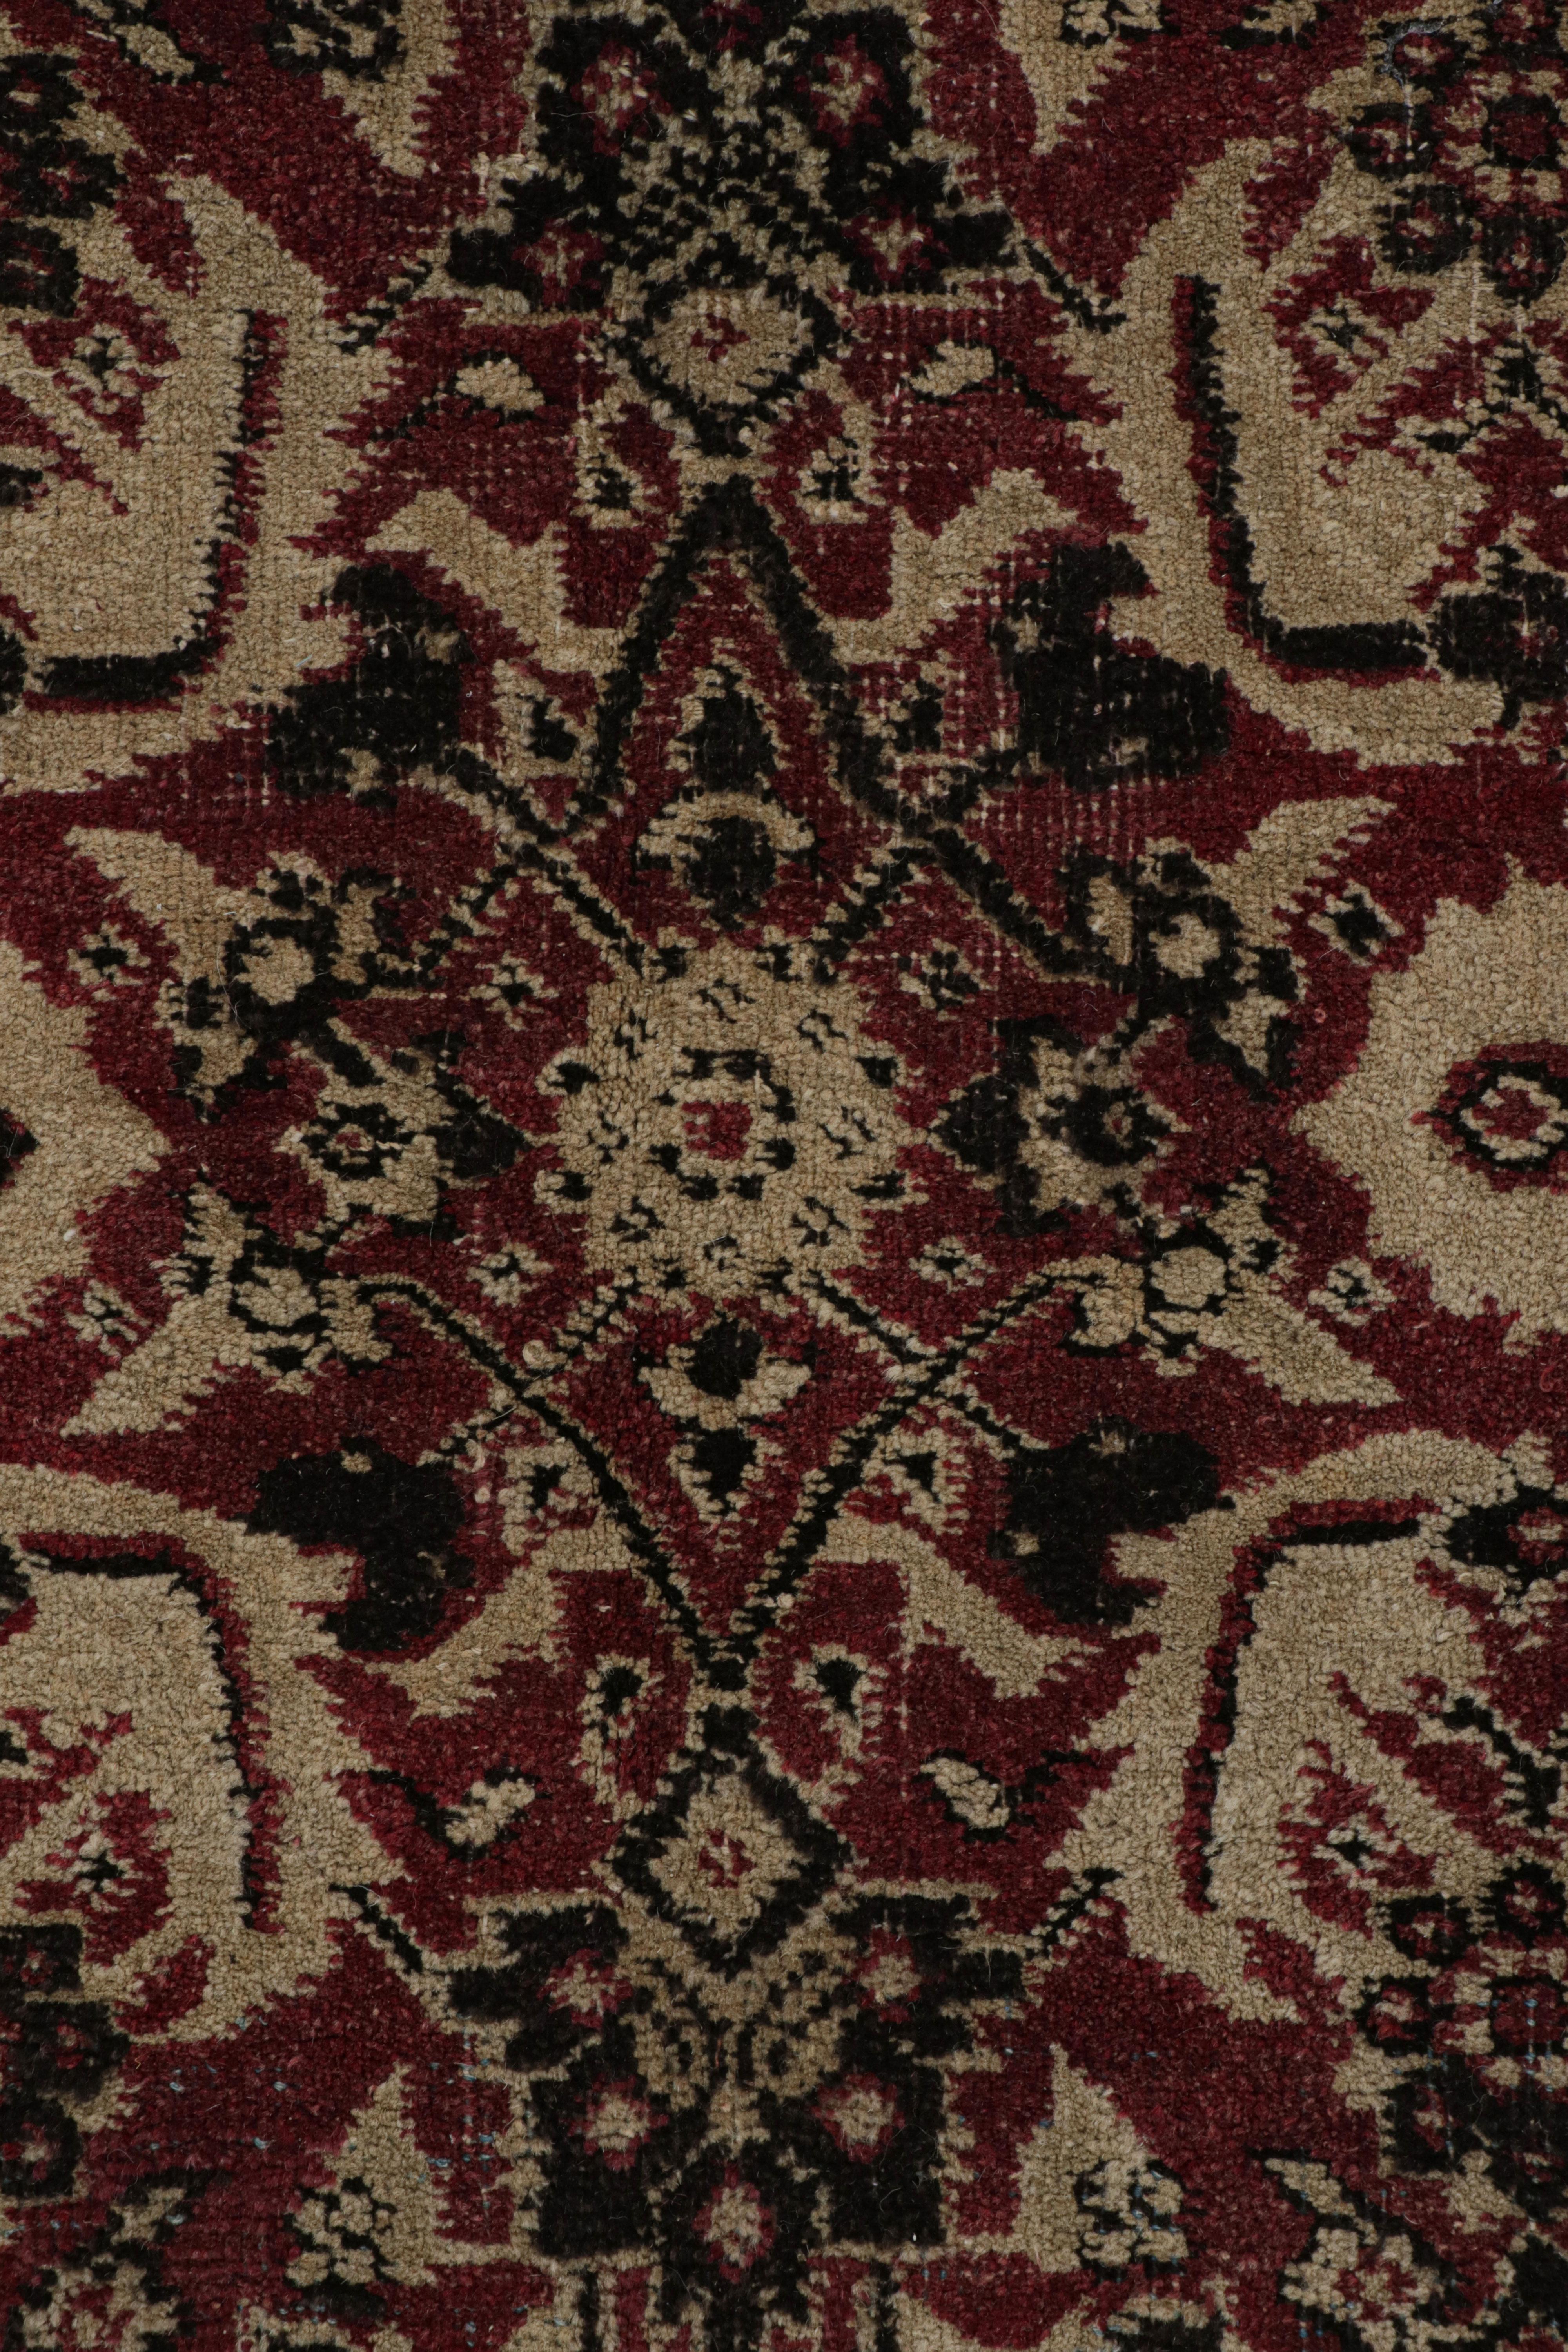 Early 20th Century Antique Agra Square Rug in Burgundy with Floral Patterns, from Rug & Kilim For Sale